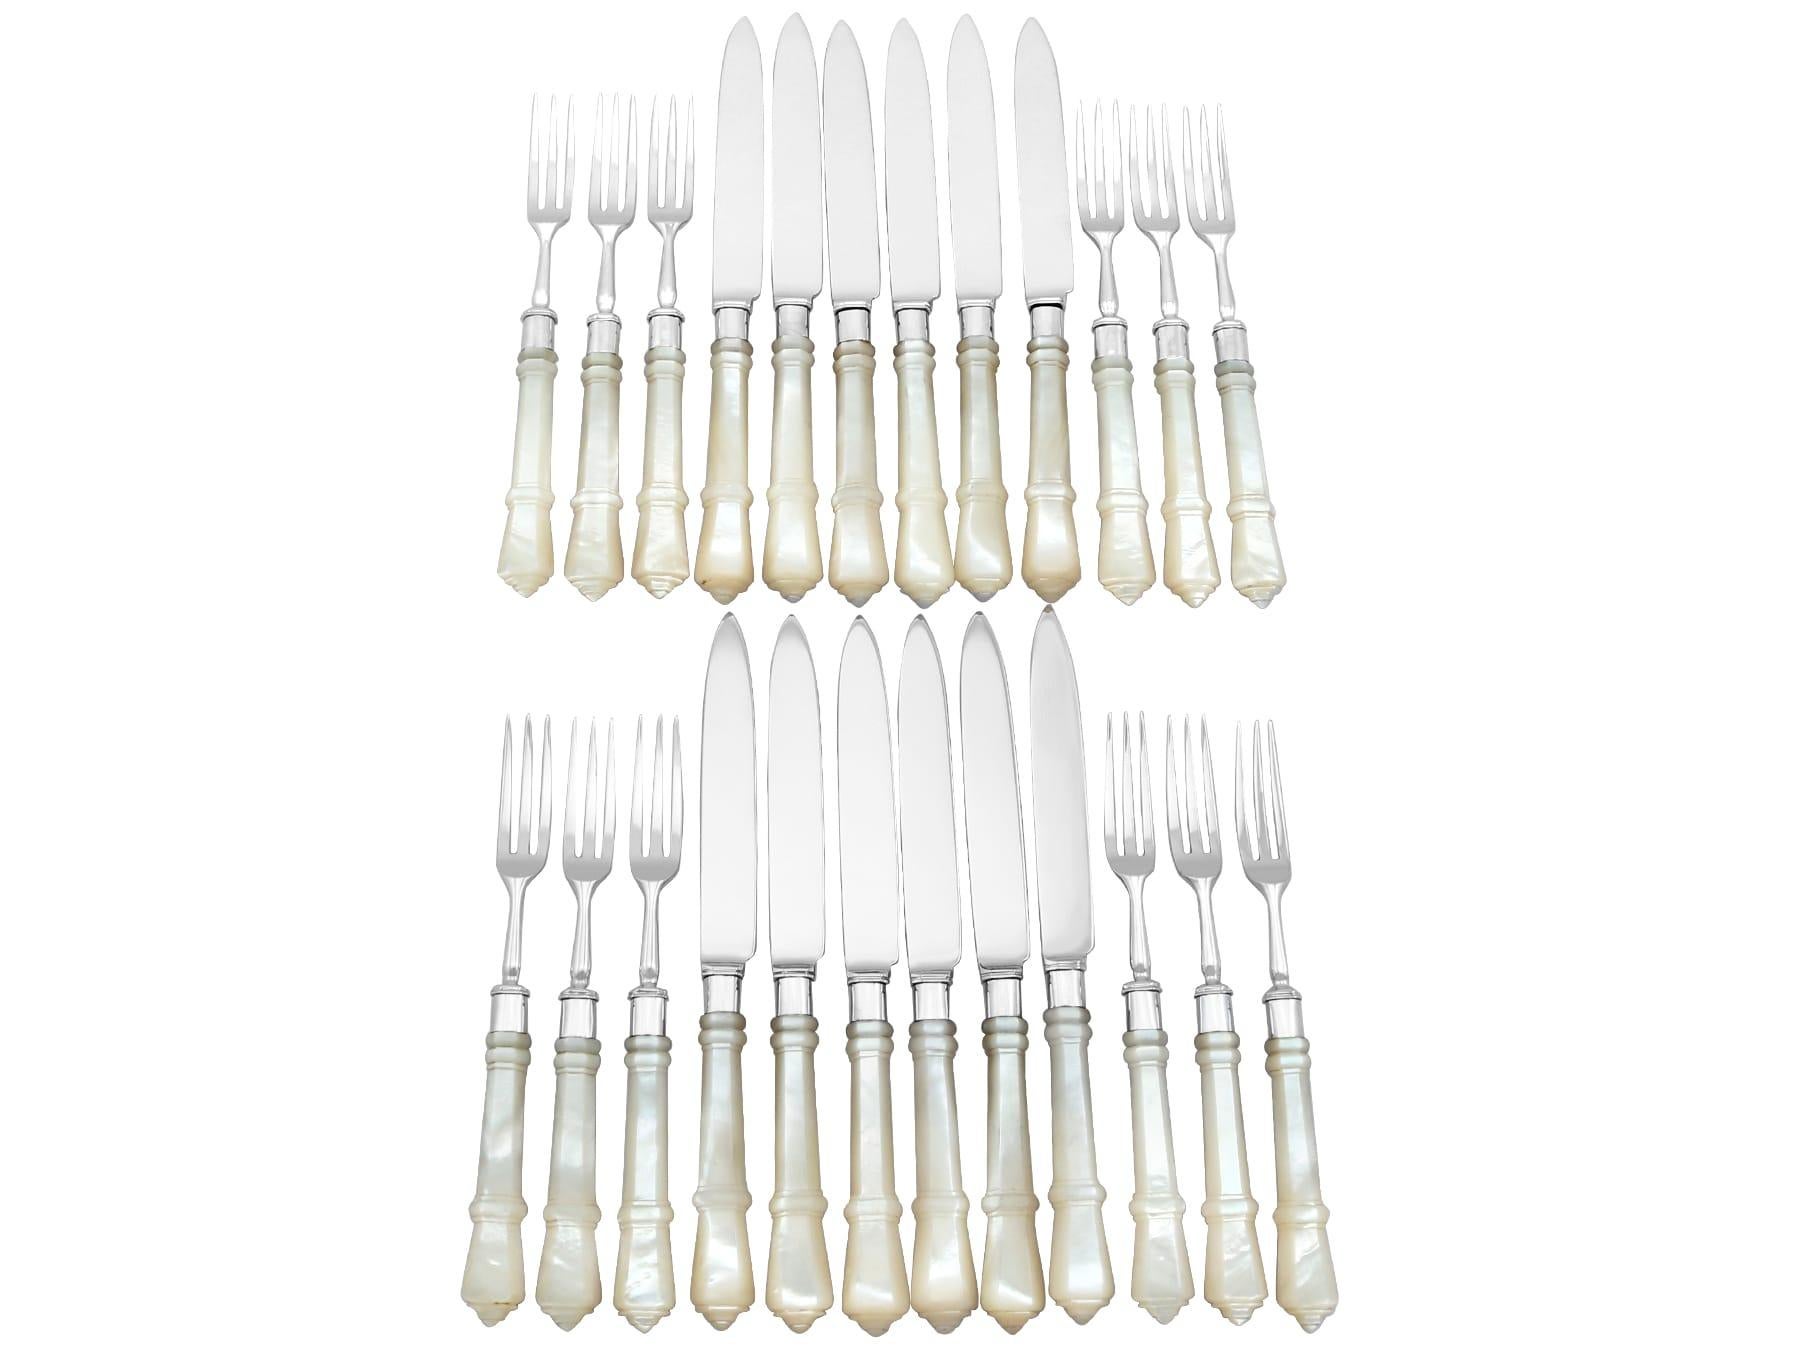 An exceptional, fine and impressive antique Edwardian English sterling silver and mother of pearl fruit/dessert cutlery set for twelve persons - boxed; an addition to our dining silverware collection

This exceptional antique Edwardian sterling